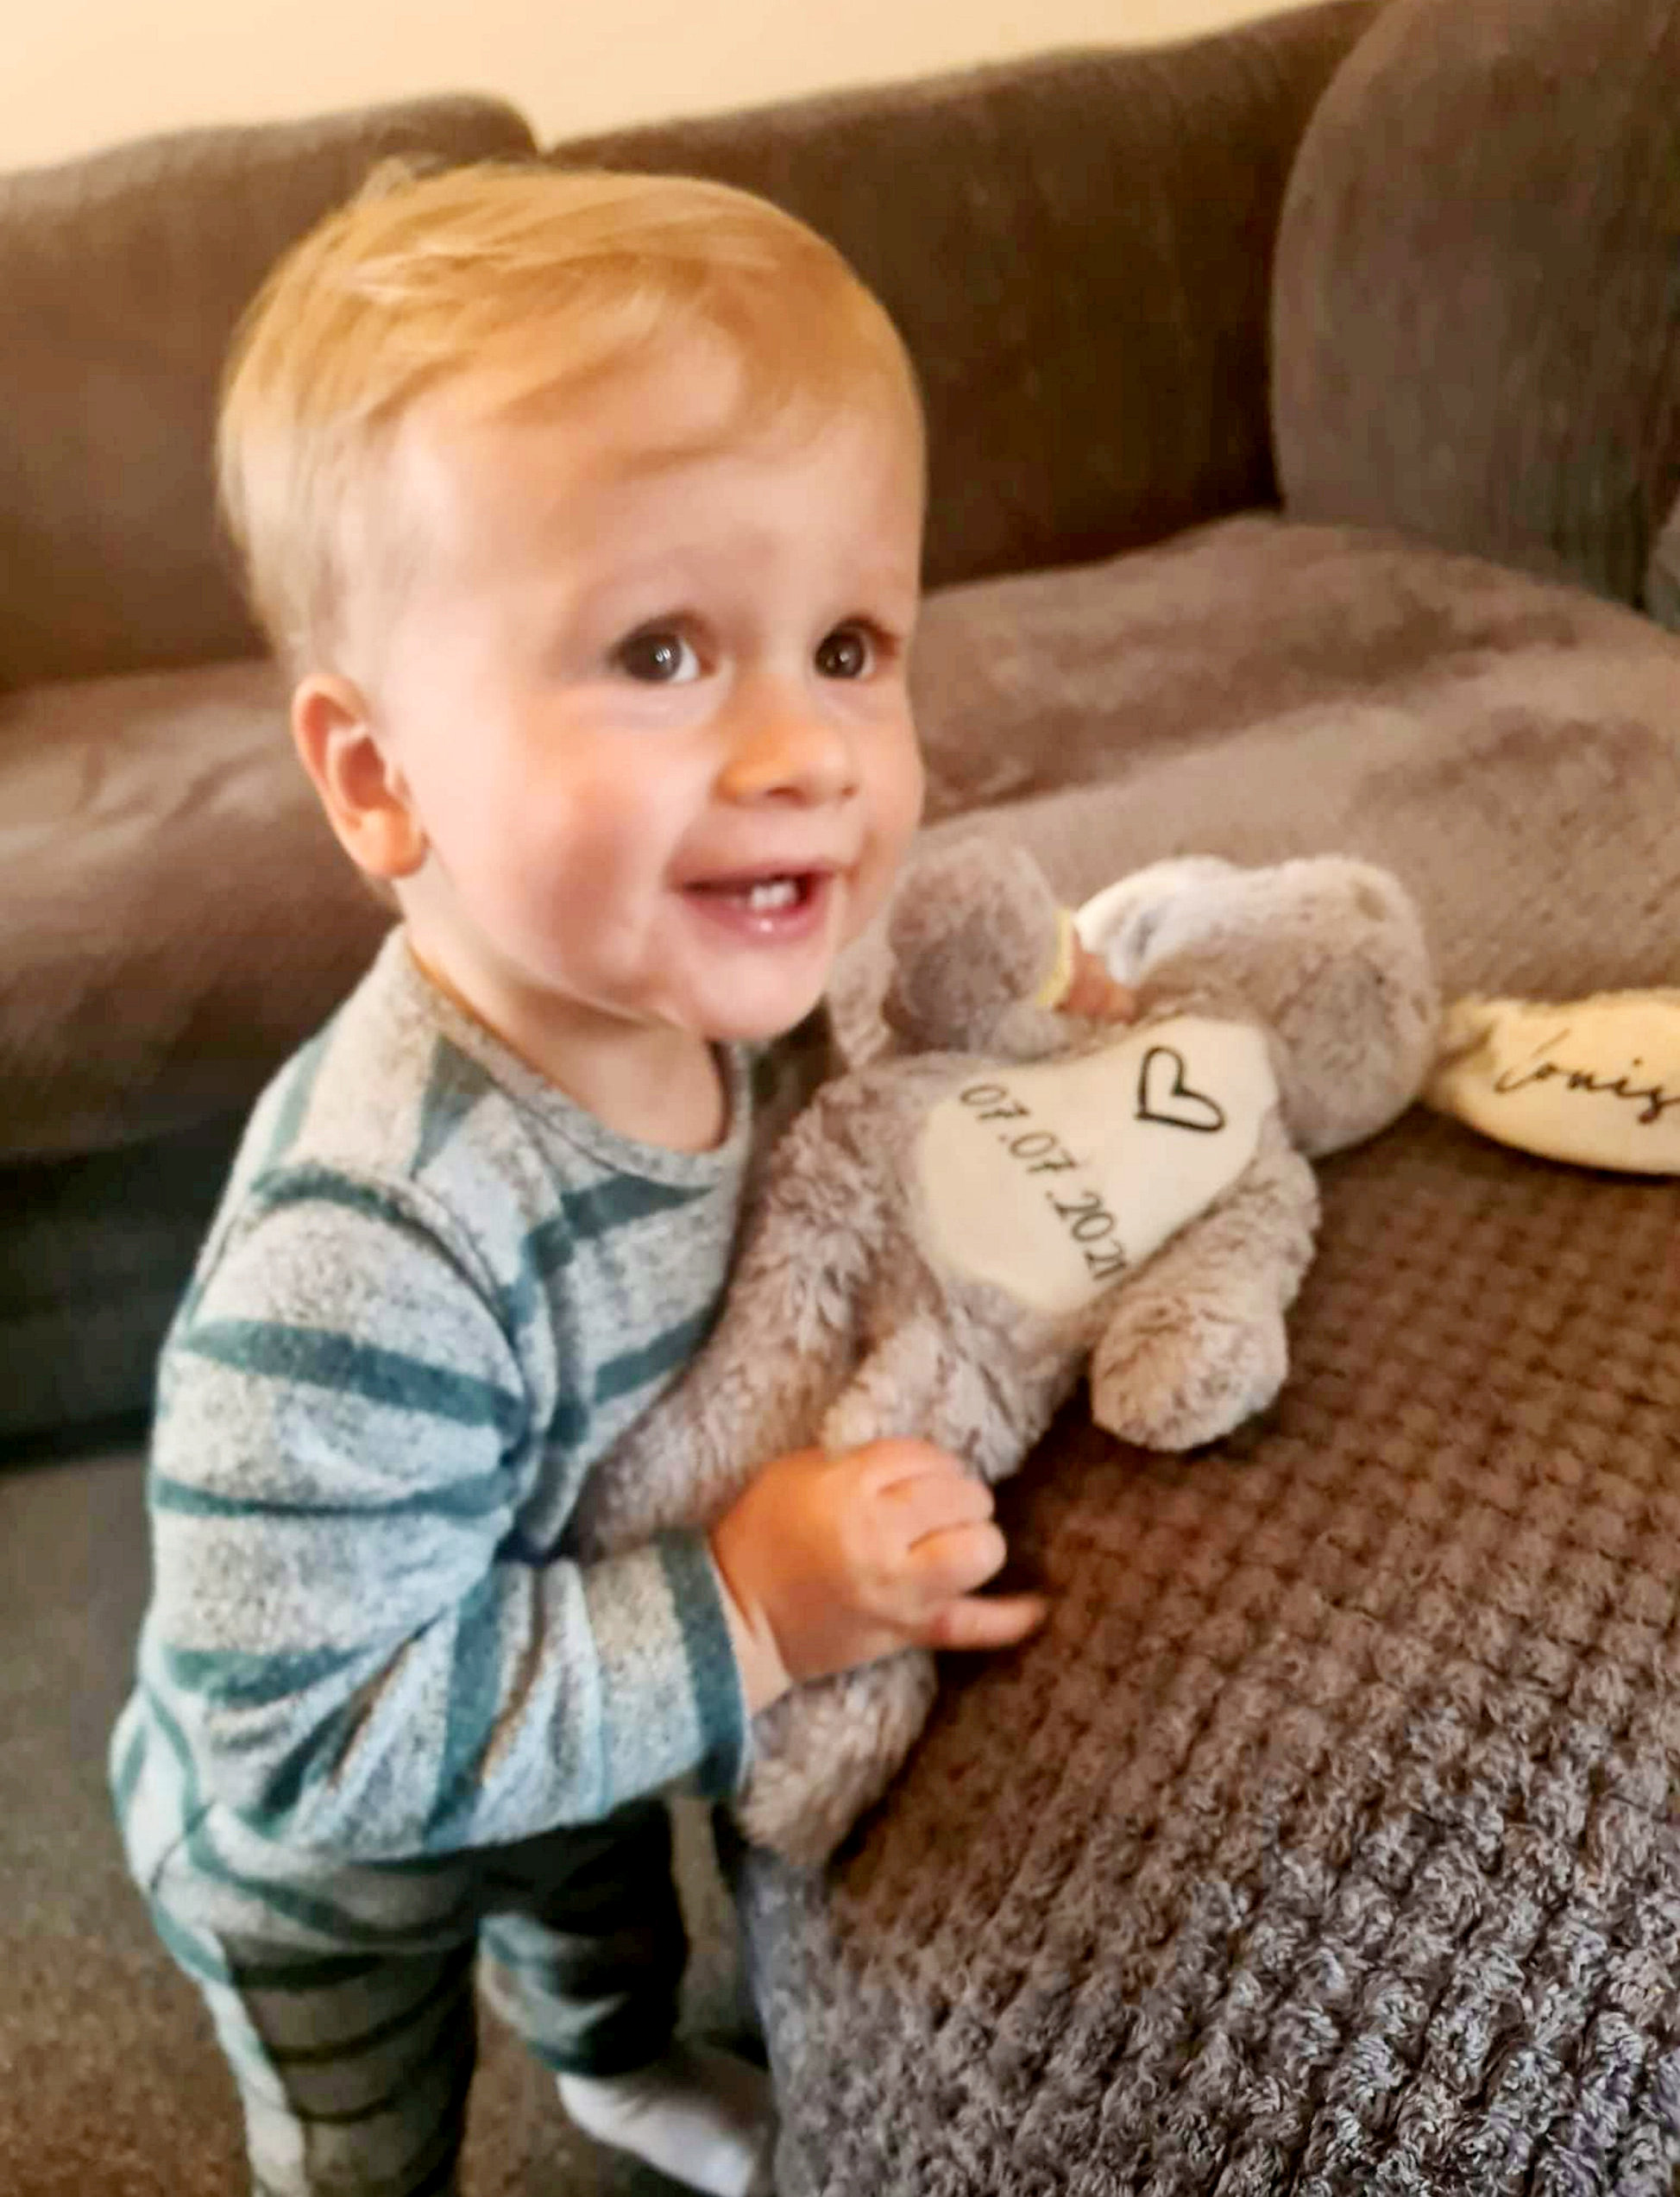 A mom has praised an airline for going 'out of its way' by reuniting him with his favorite toy bunny - just in time for his first birthday. (Steve Chatterley, SWNS/Zenger)